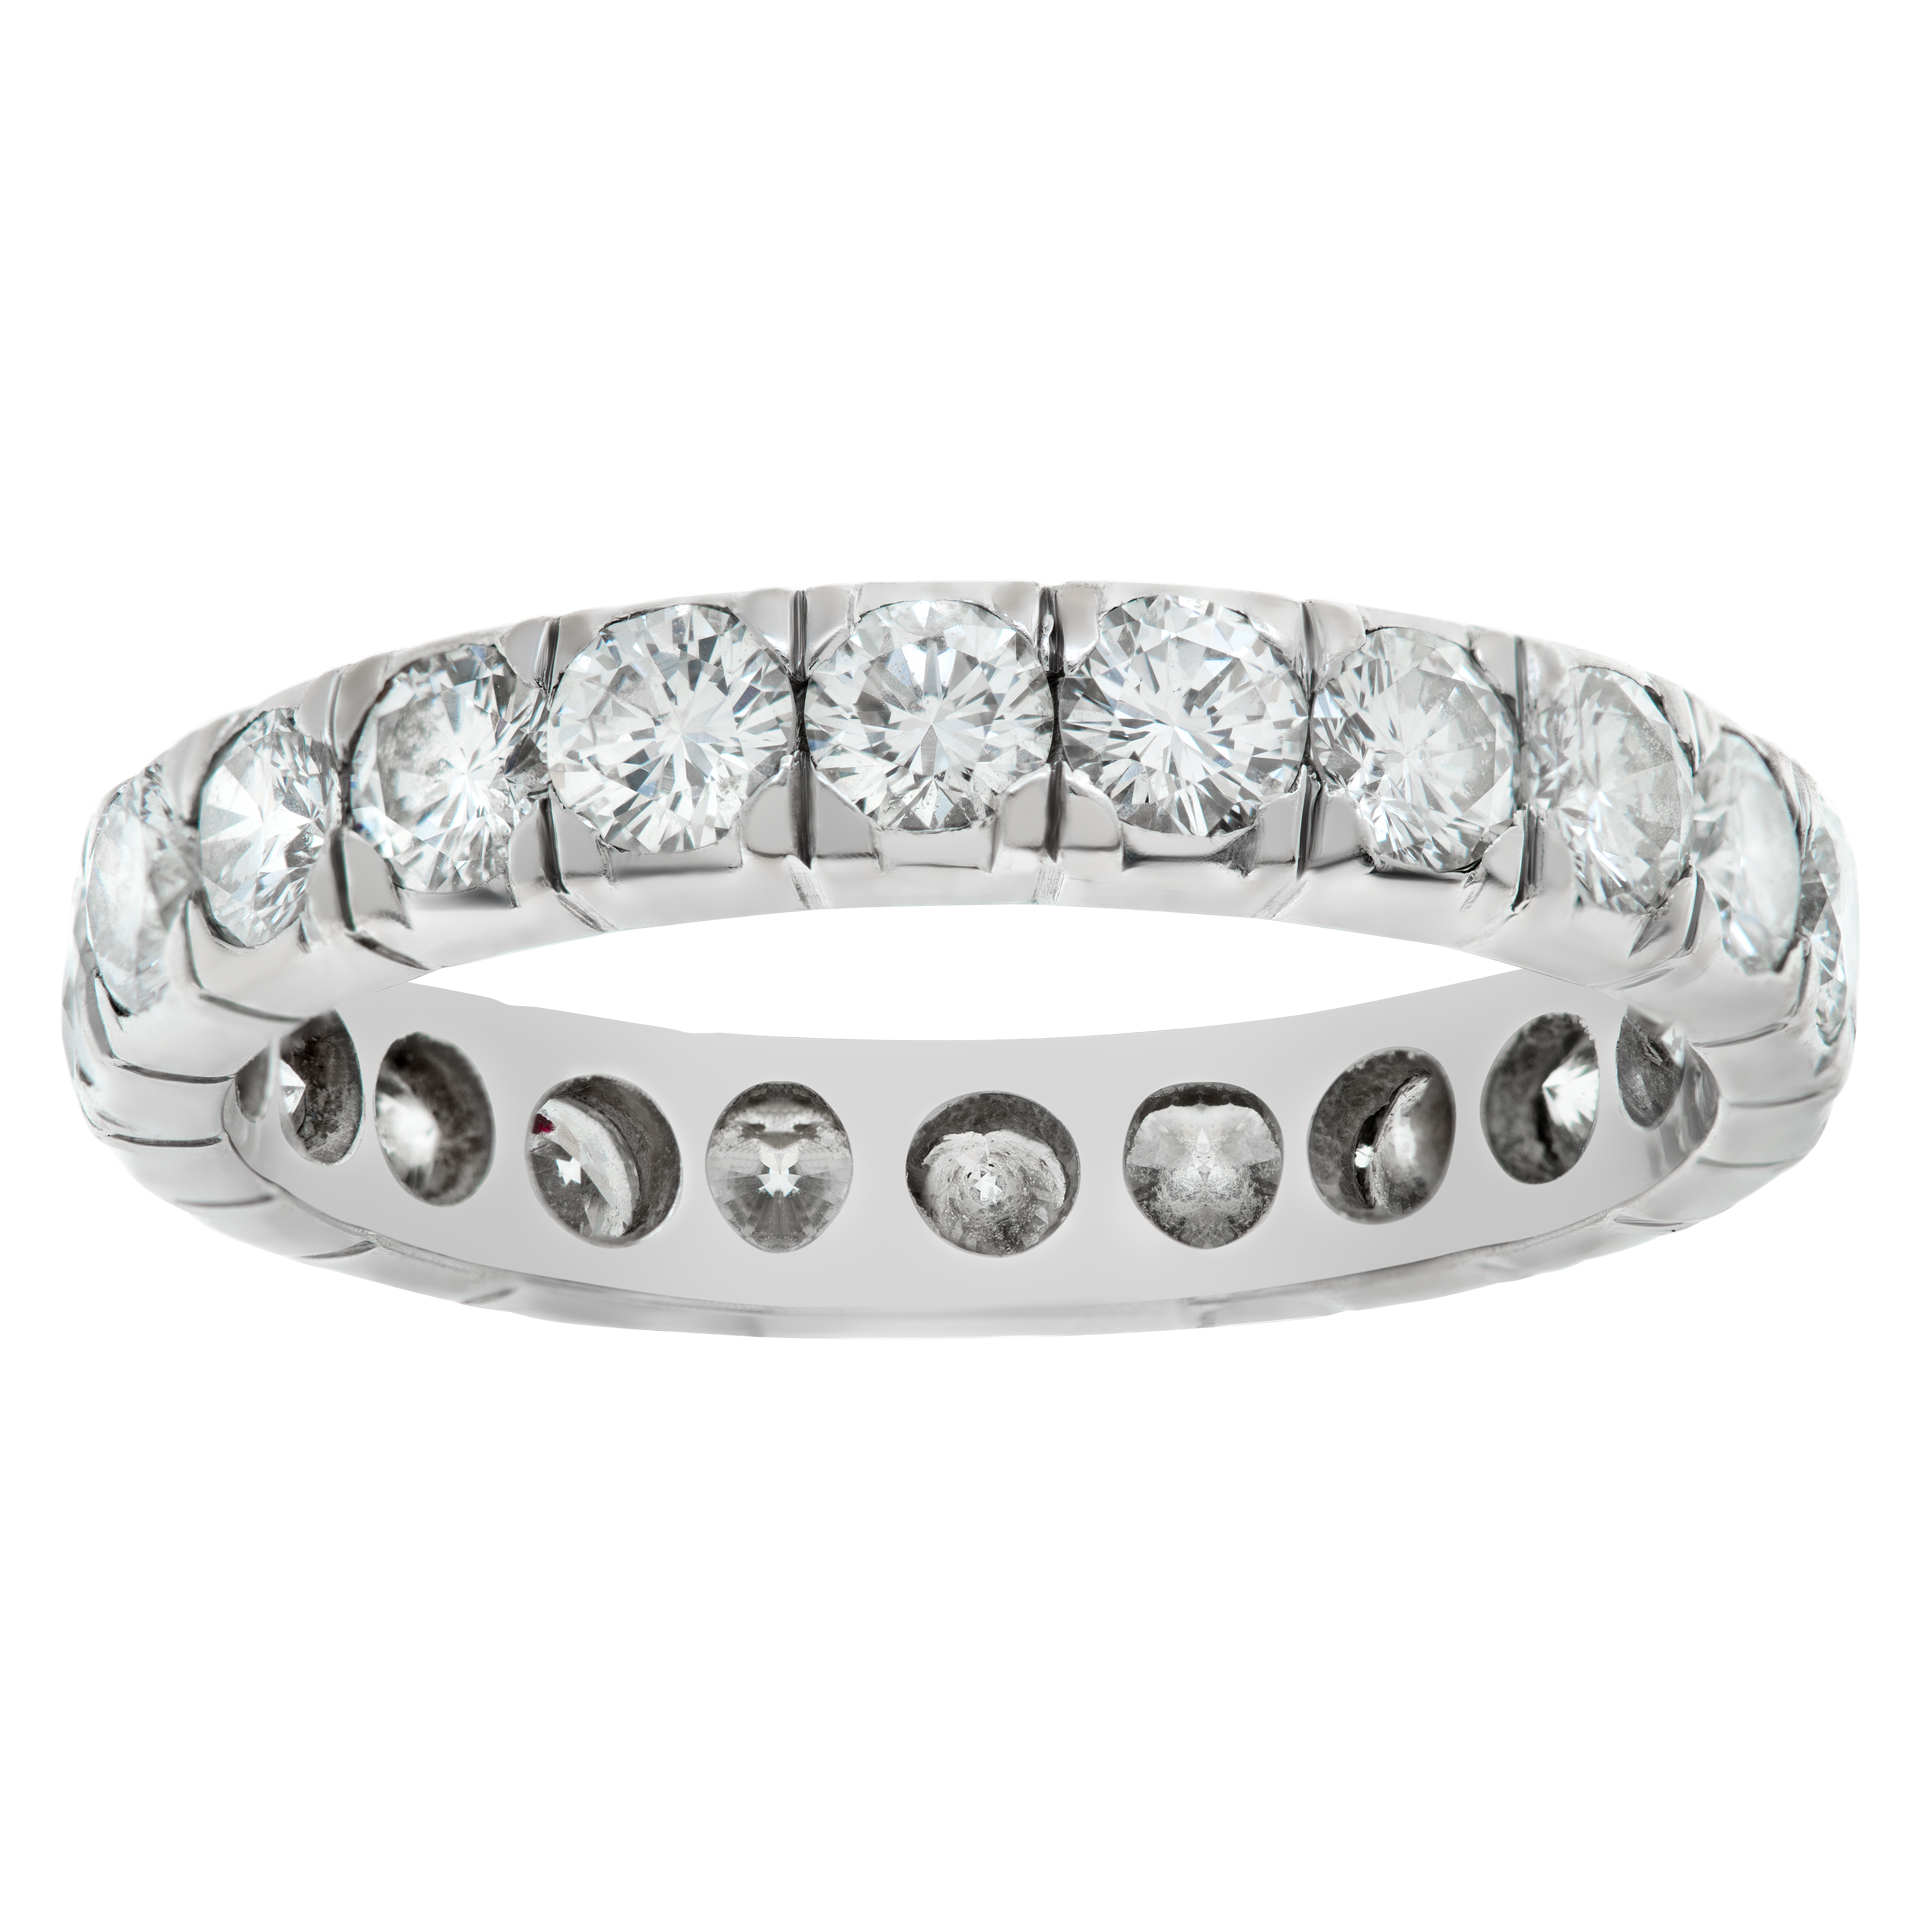 18k white gold eternity band w/ approx. 1.5 cts in G-H Color, VS Clarity diamonds image 1